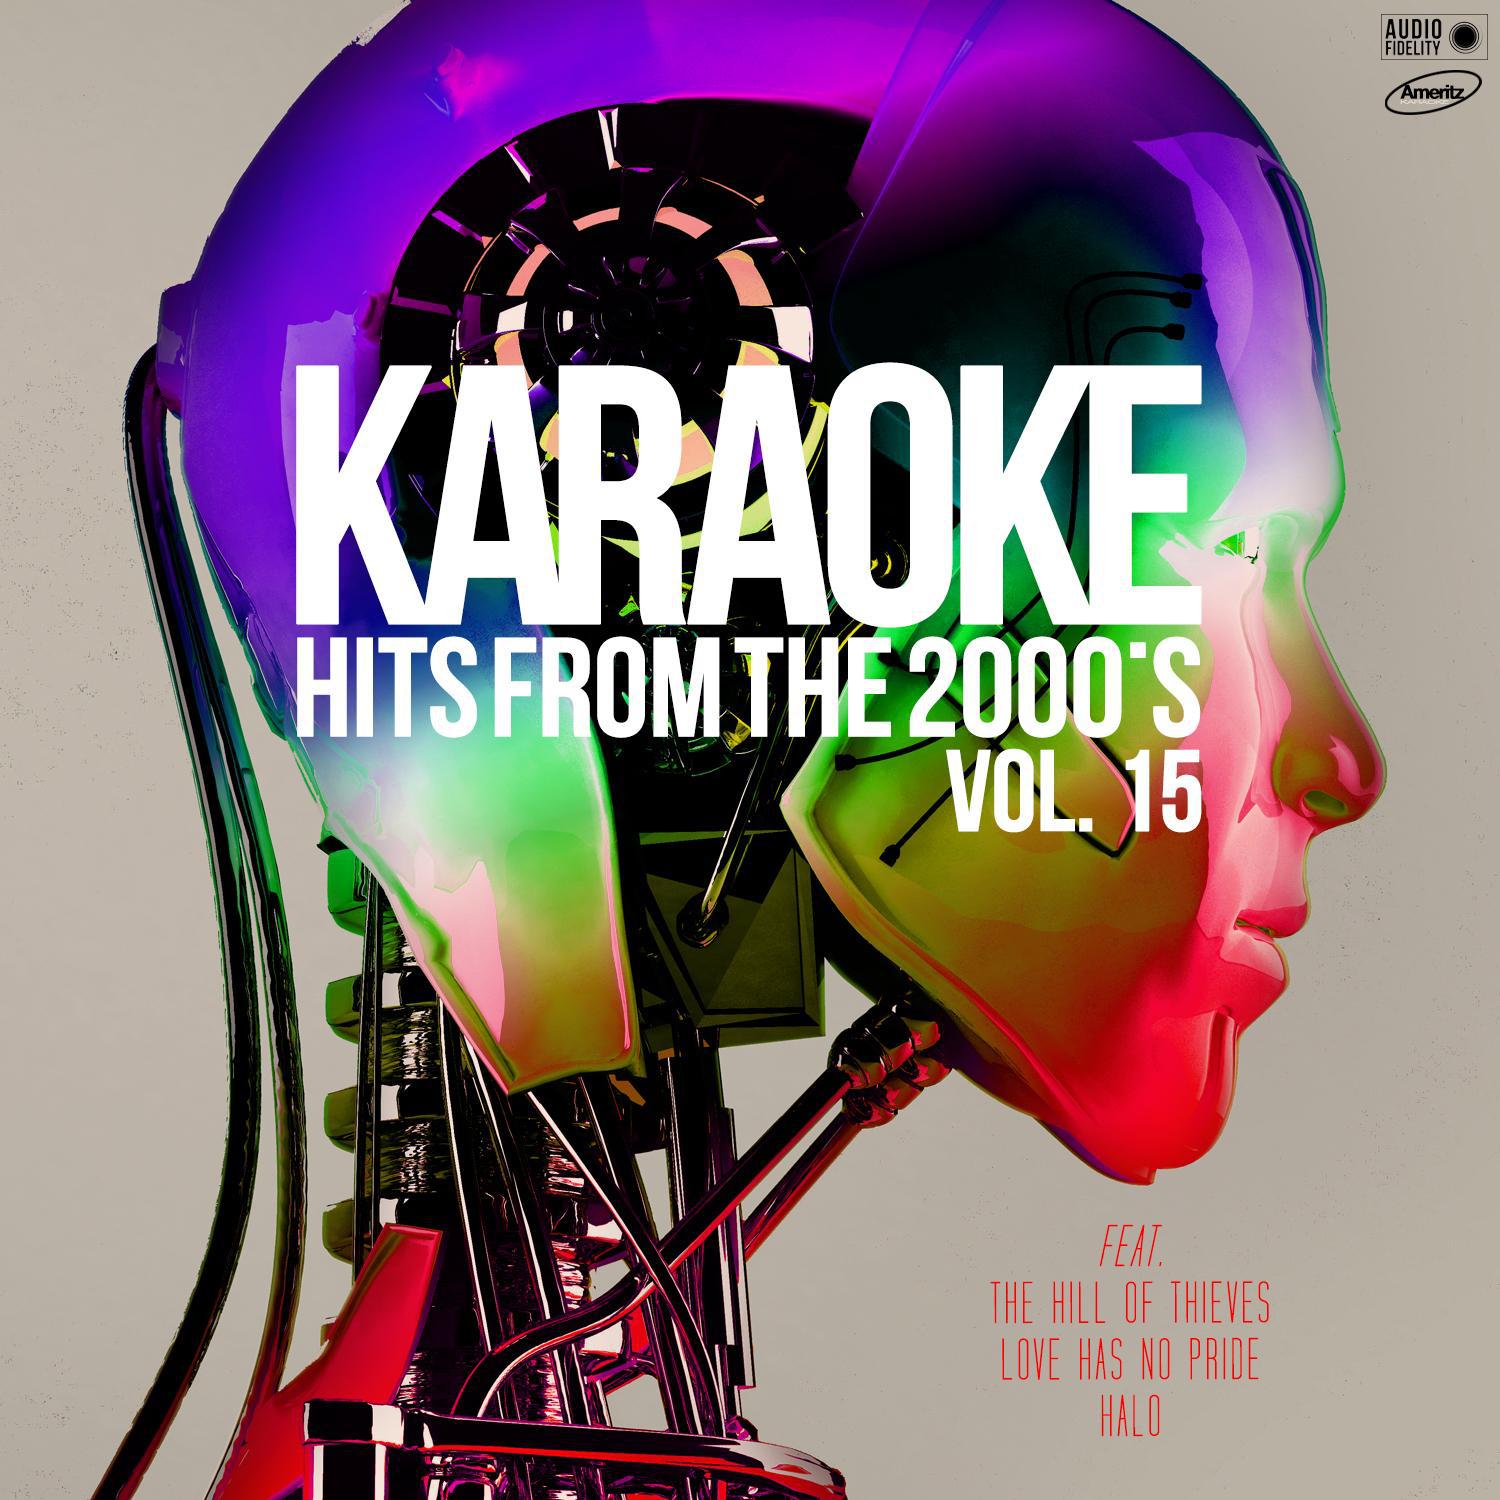 Karaoke Hits from the 2000's, Vol. 15